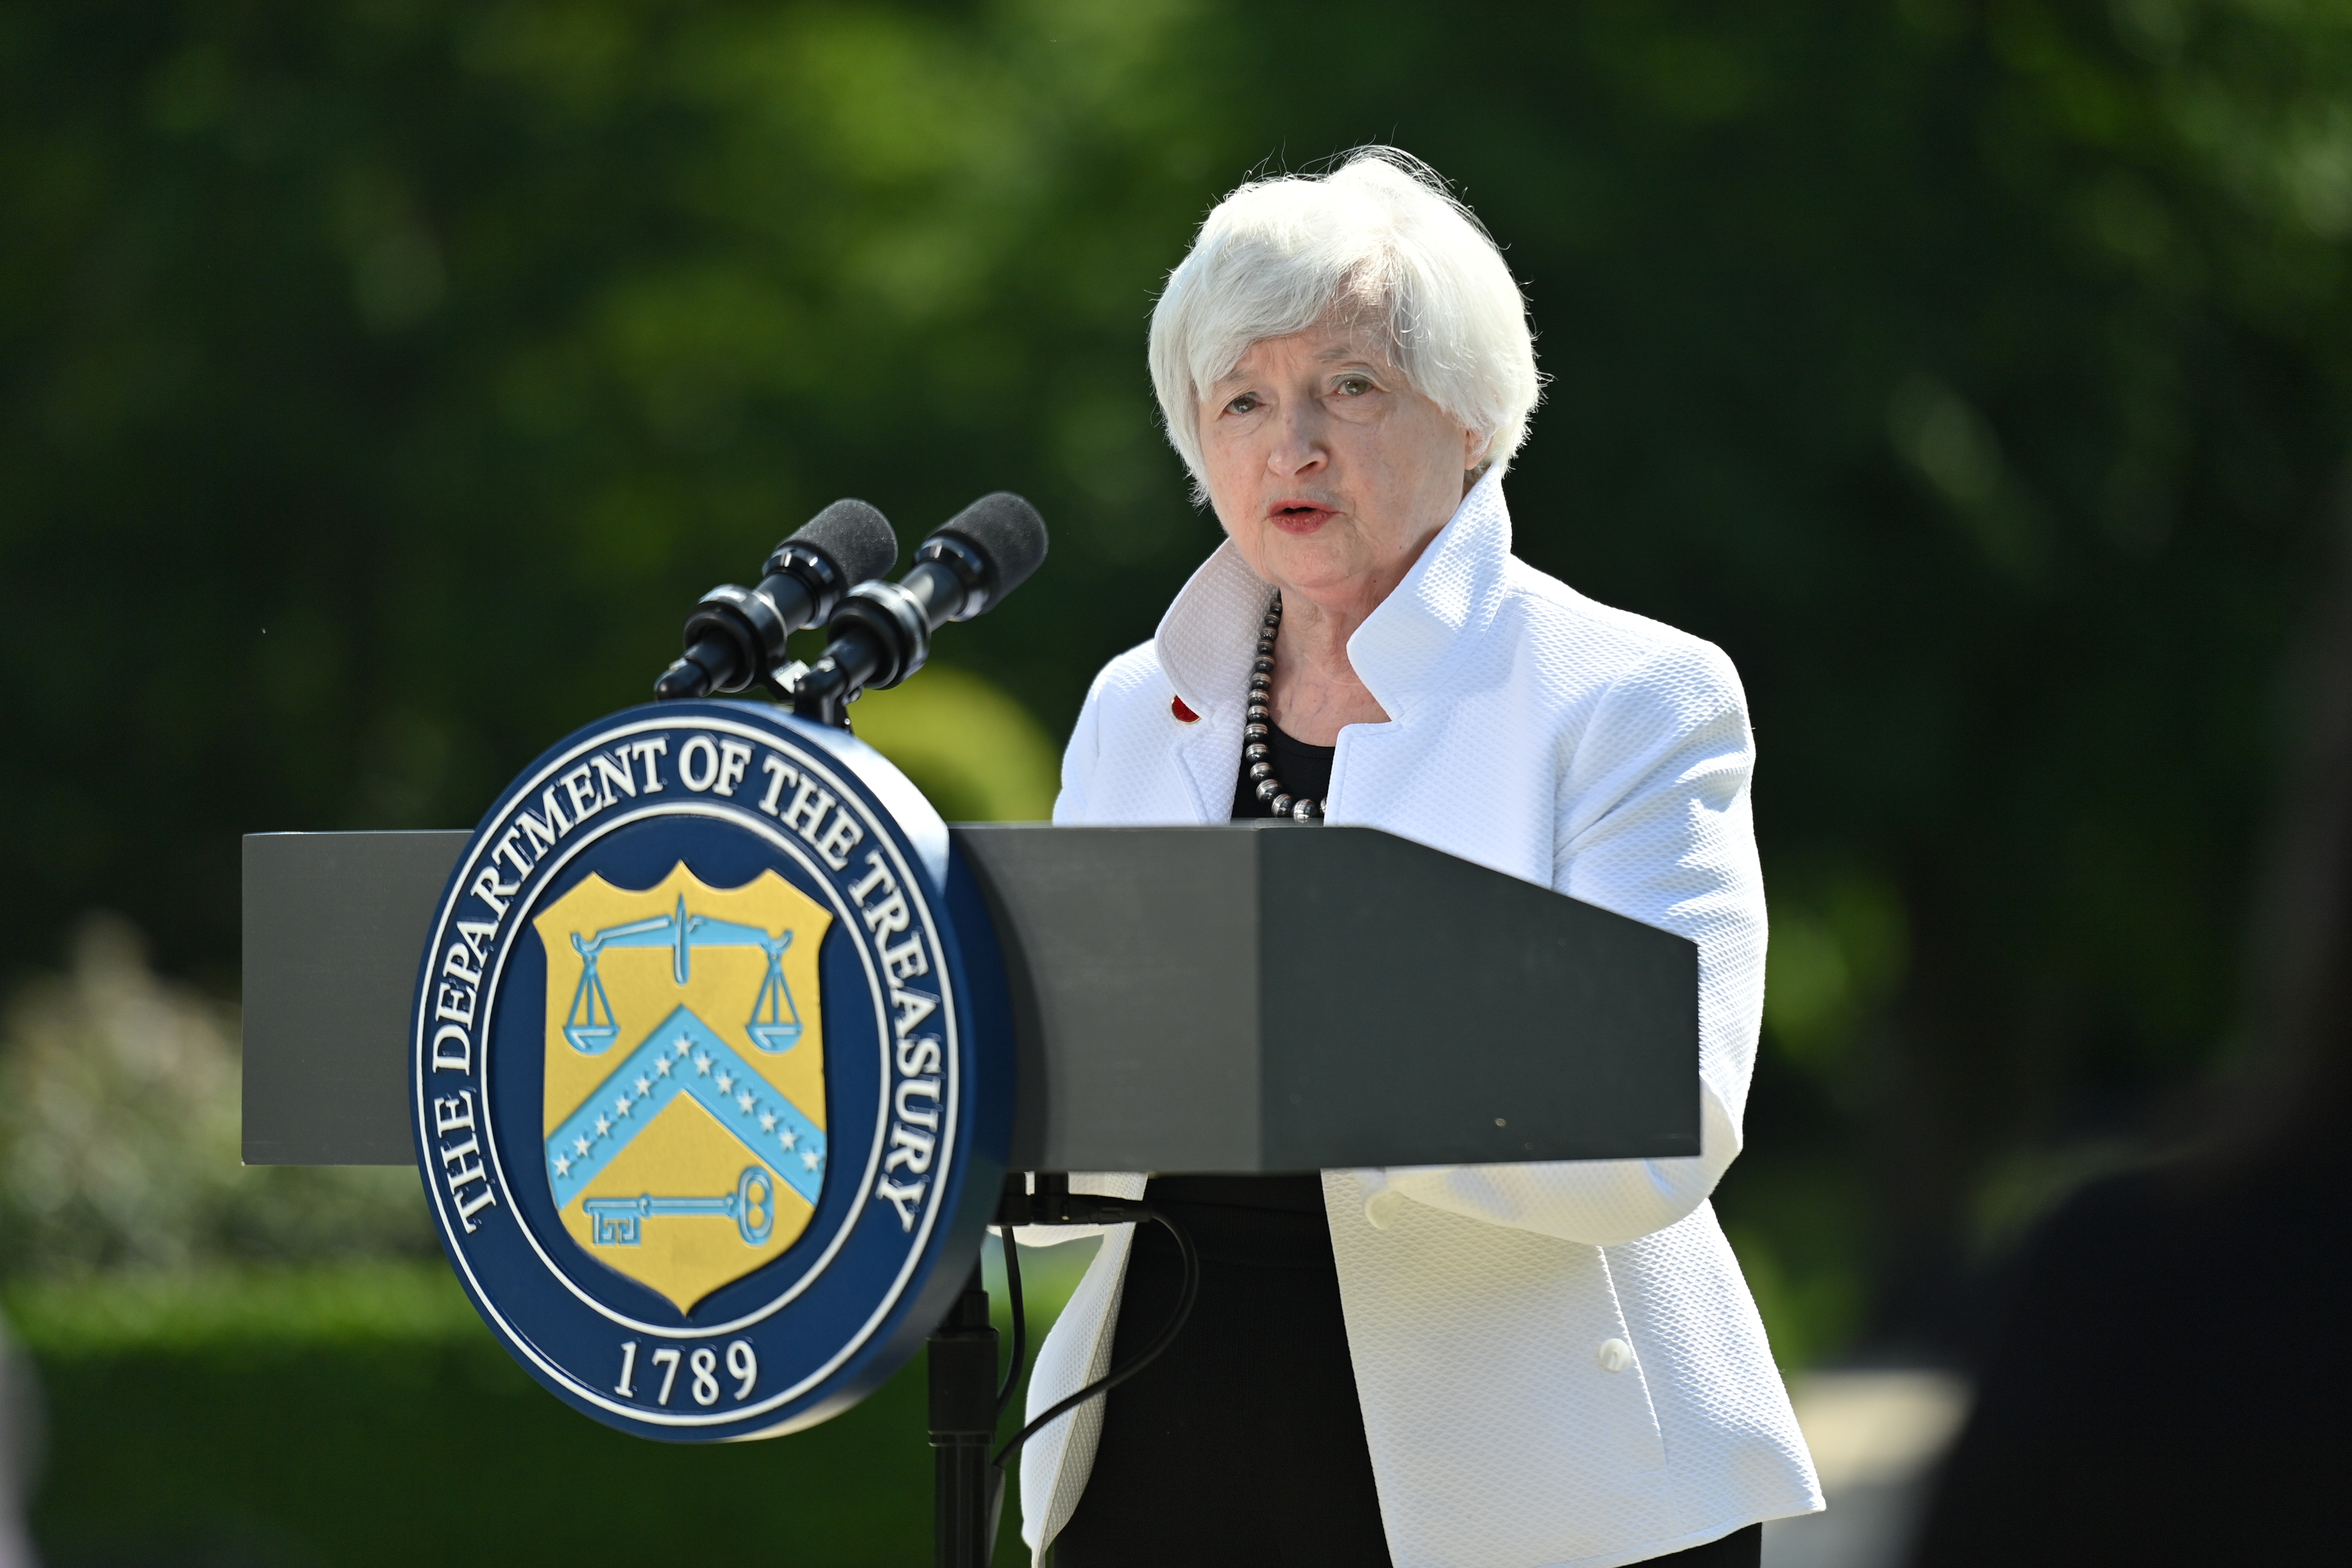 U.S. Treasury Secretary Janet Yellen speaks during a news conference, after attending the G7 finance ministers meeting, at Winfield House in London, Britain June 5, 2021. Justin Tallis/Pool via REUTERS